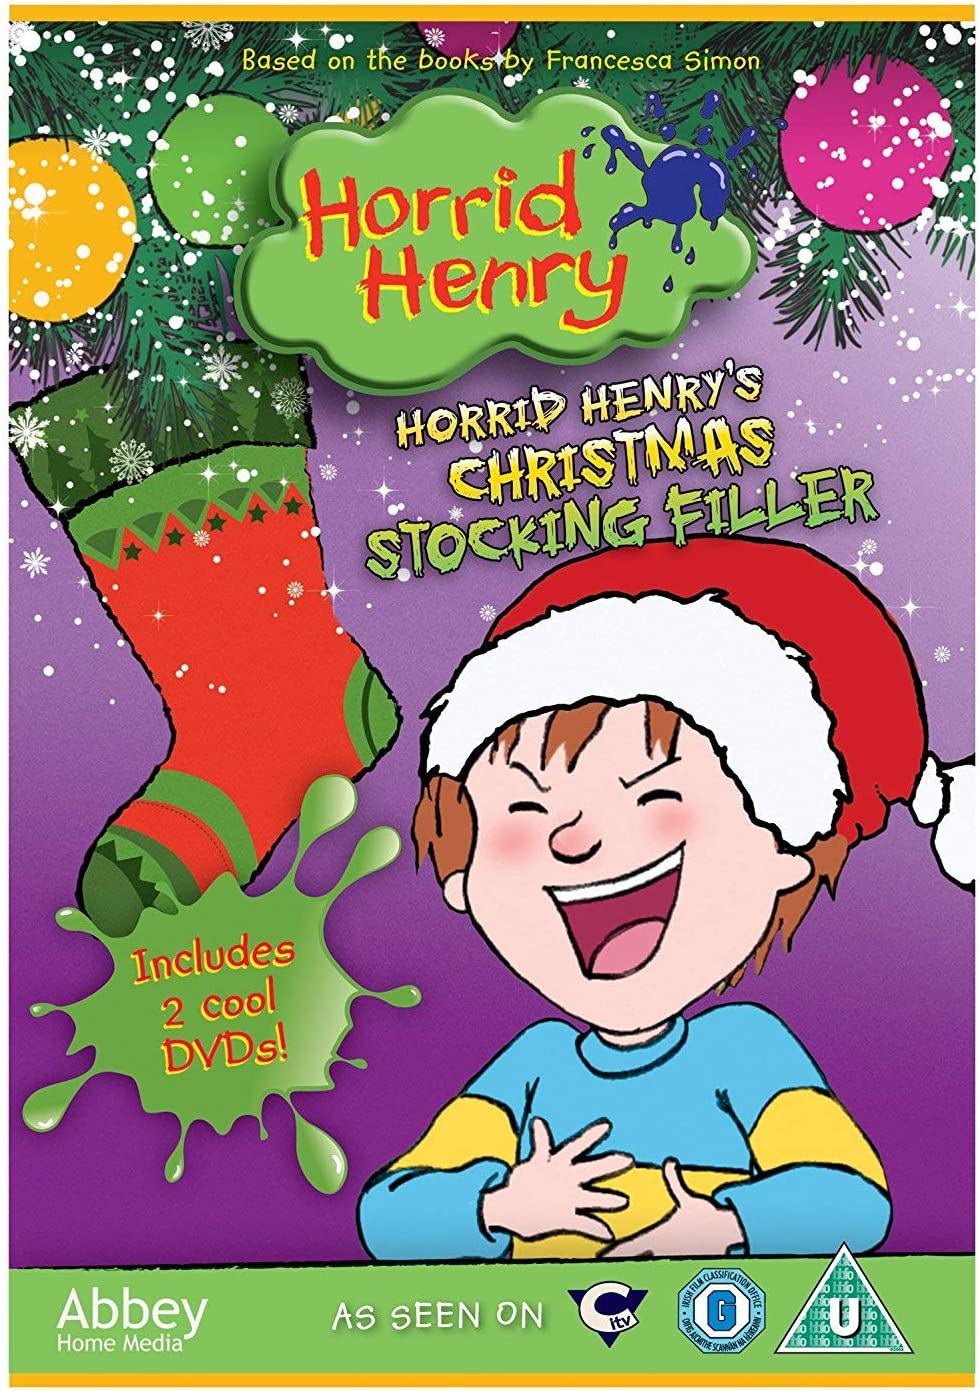 Horrid Henry's Christmas Stocking Filler - Delivers & Message and Christmas Underpants [DVD]